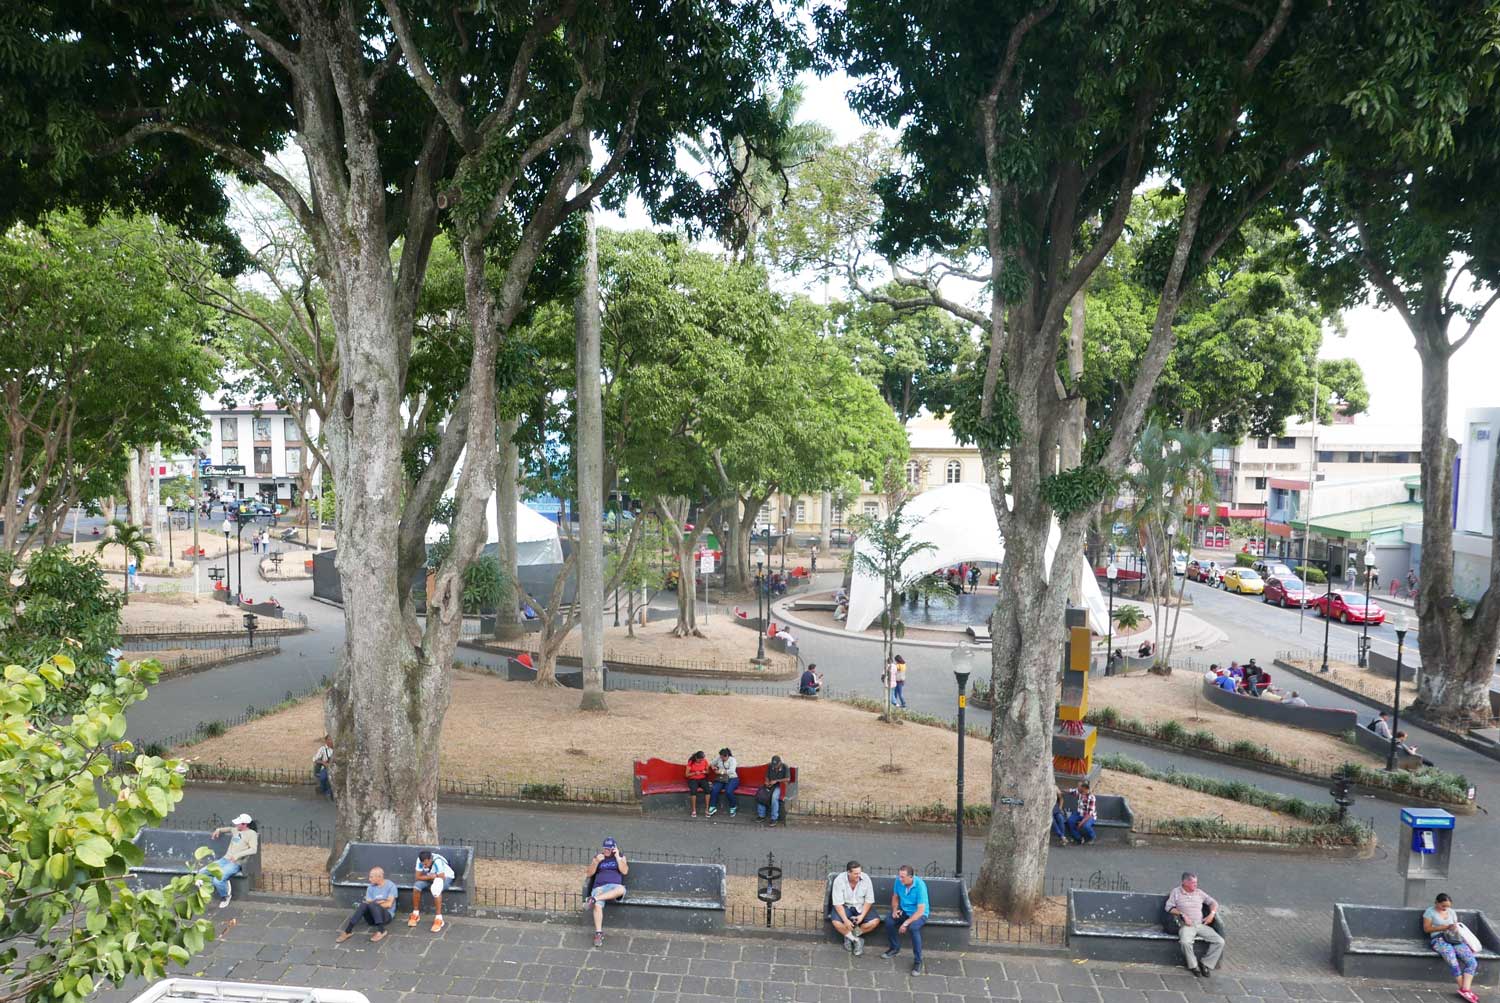 Overview of the Parque Central in Alajuela